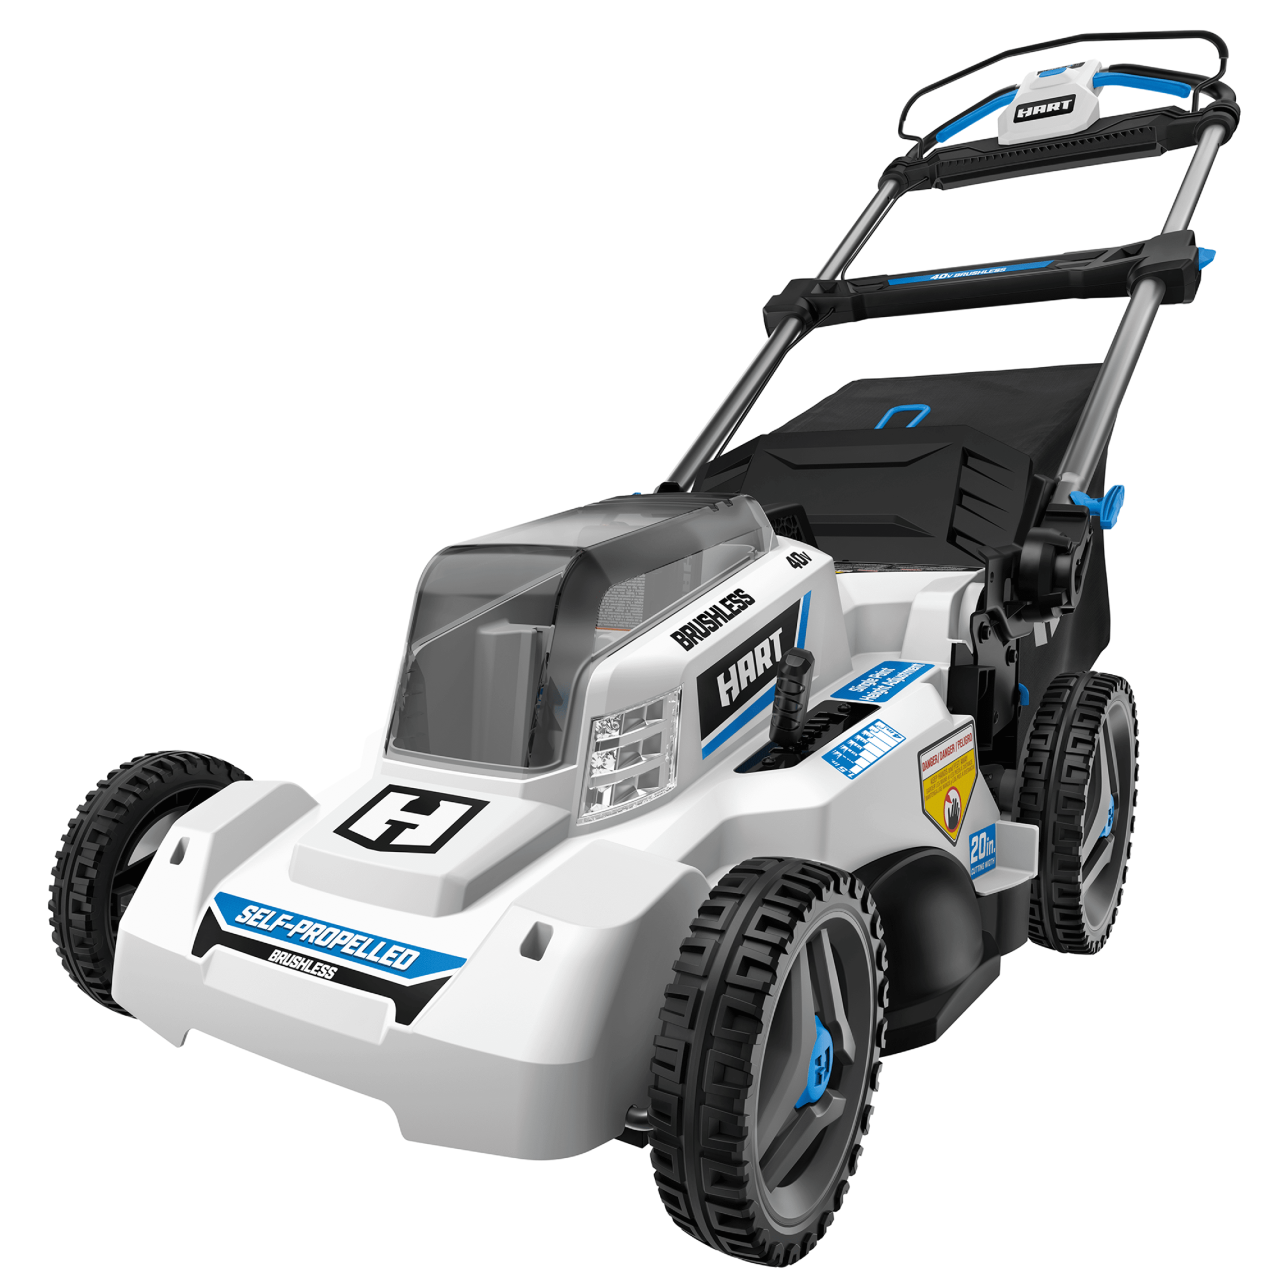 Mower kobalt lawn propelled self electric volt cordless lowes included lithium brushless ion batteries